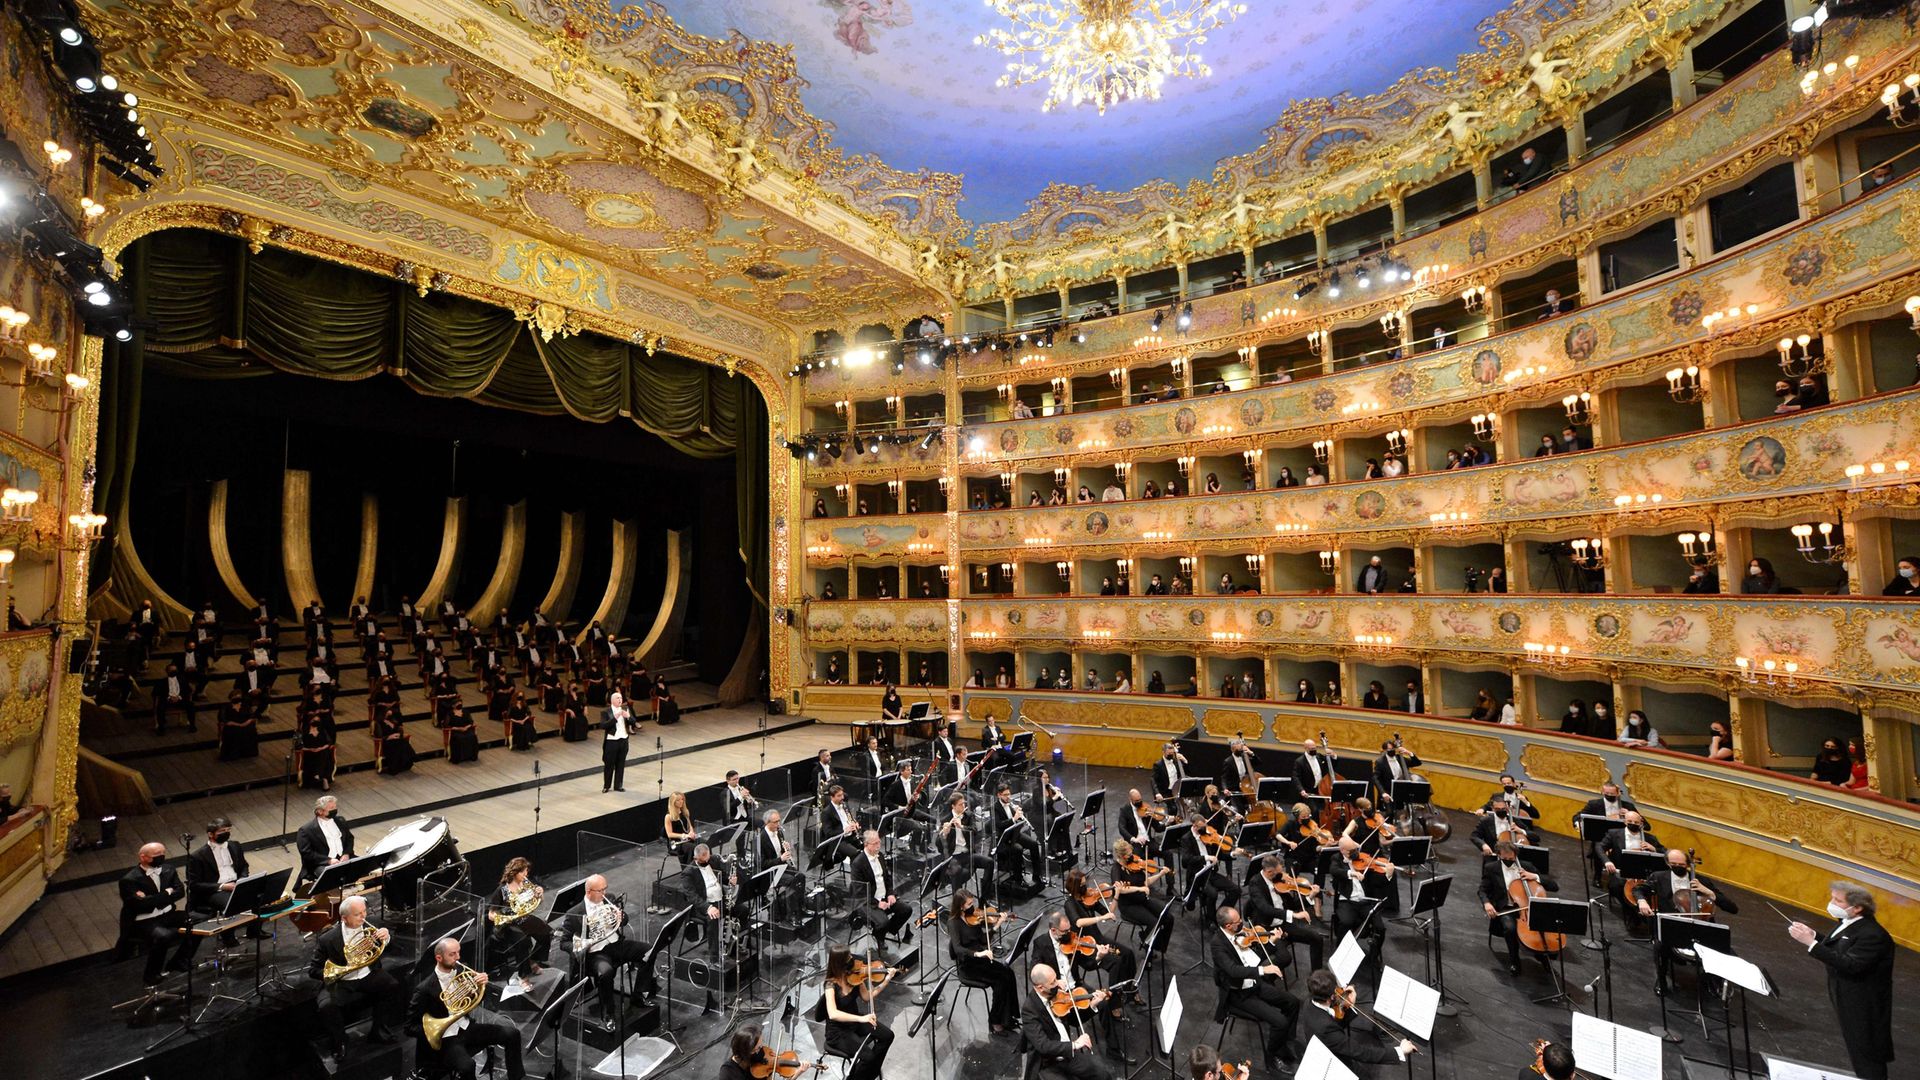 Musicians and chorus of La Fenice theatre perform the Verdi e la Fenice to mark its reopening after lockdown in April 2021 - Credit: AFP via Getty Images